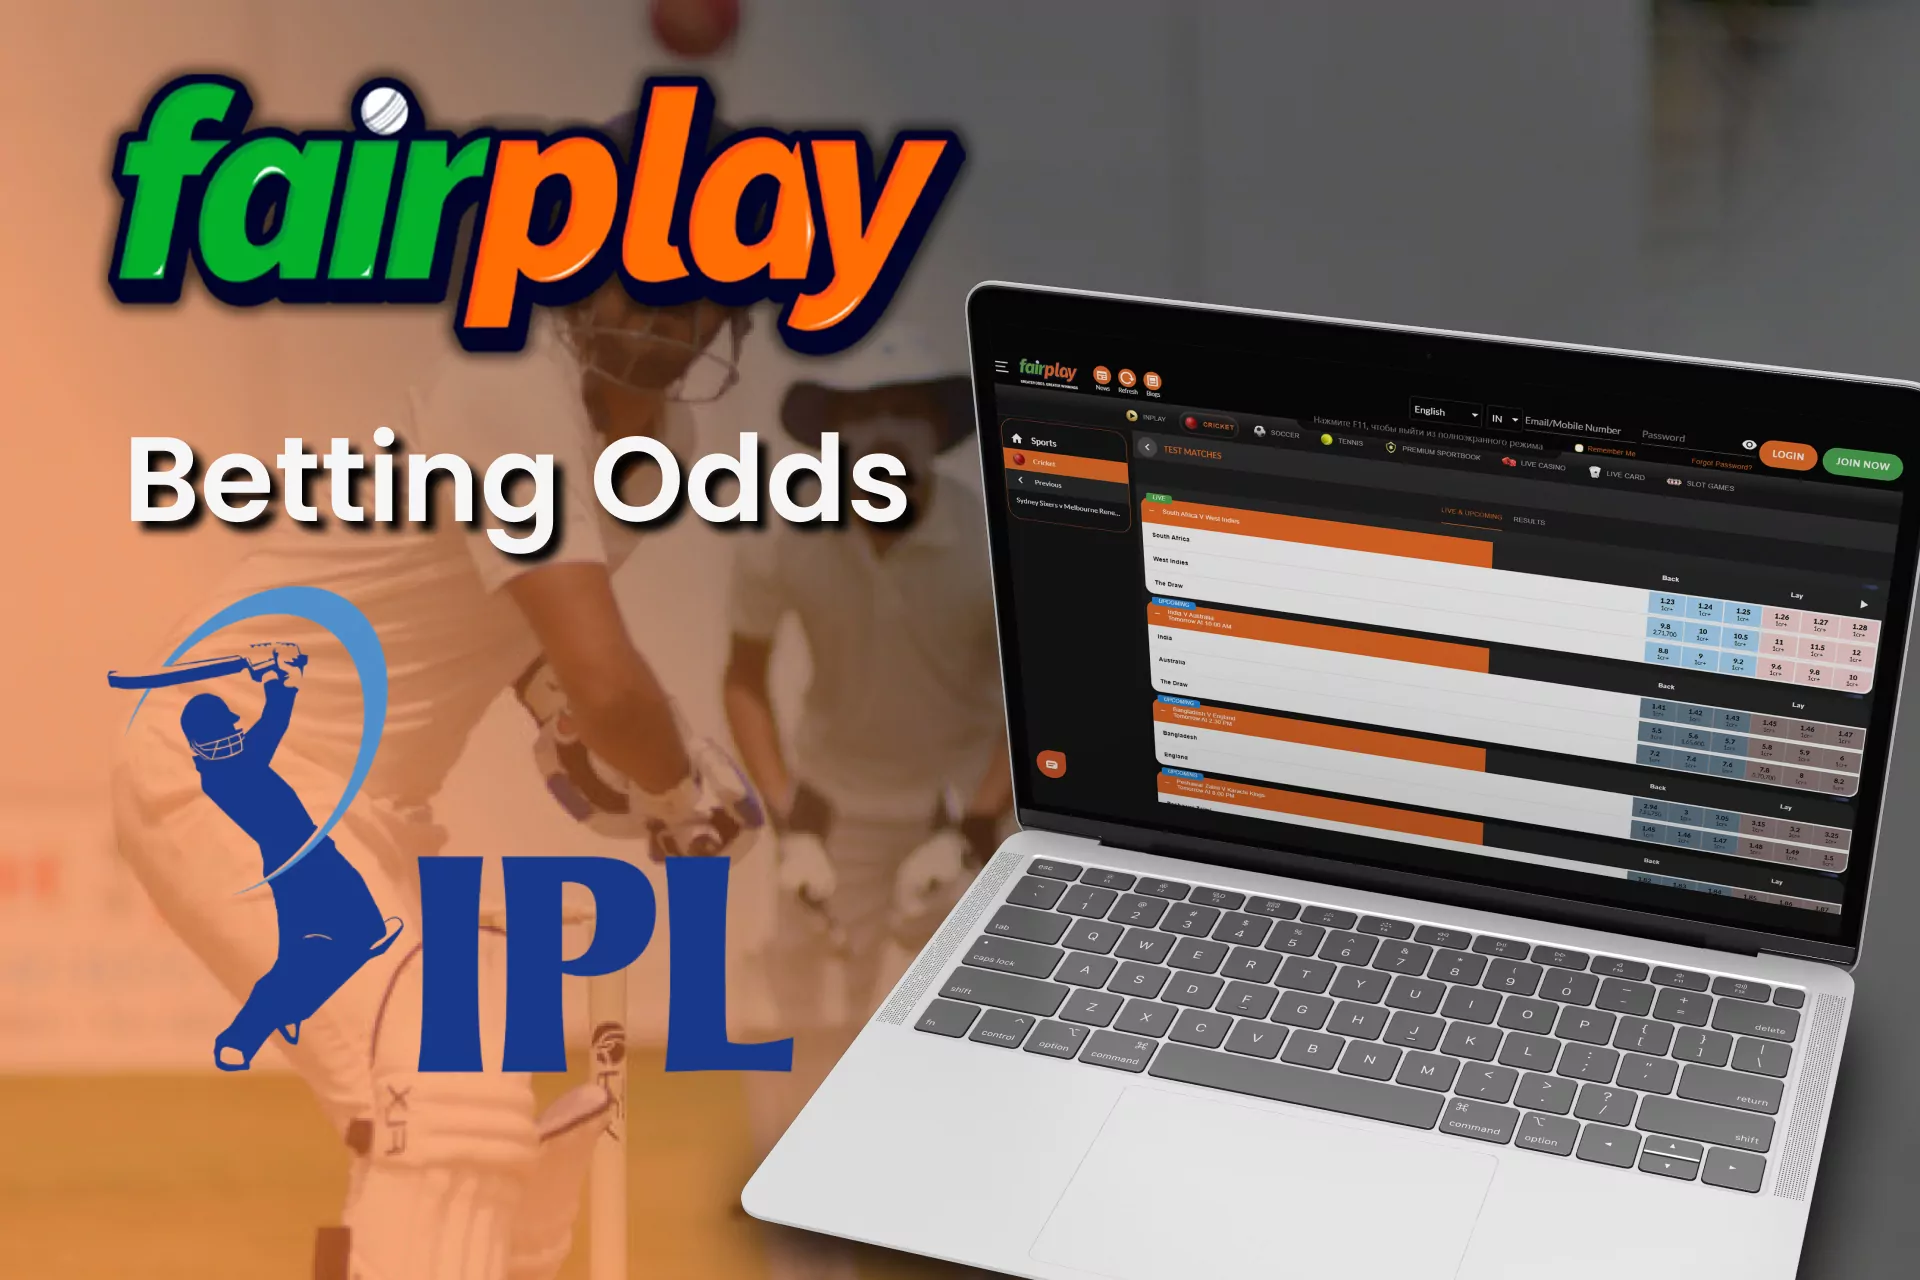 Choose a match and bet on cricket with Fairplay.